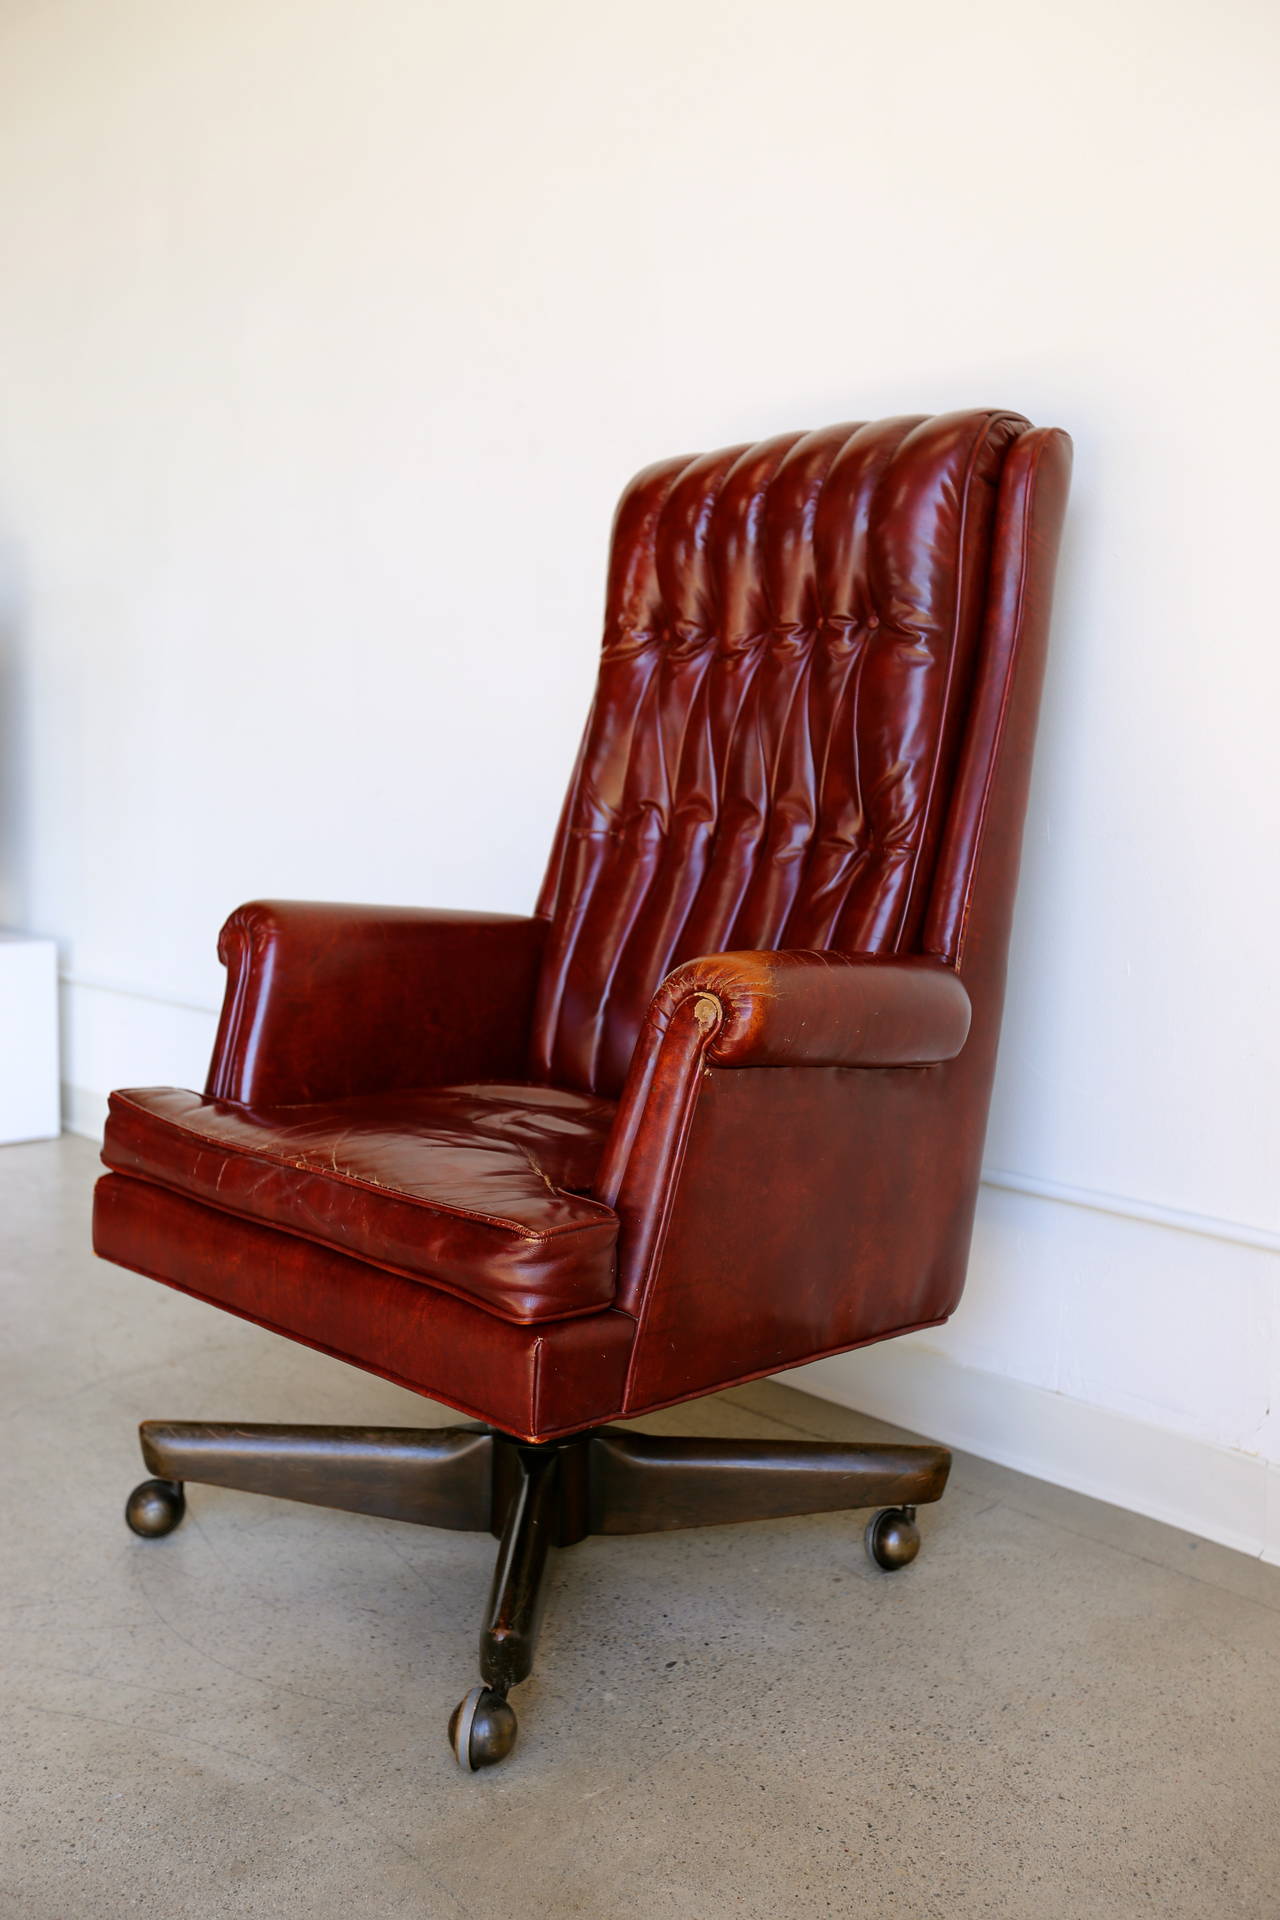 Distressed leather executive desk chair by Monteverdi-Young. This chair swivels and tilts.